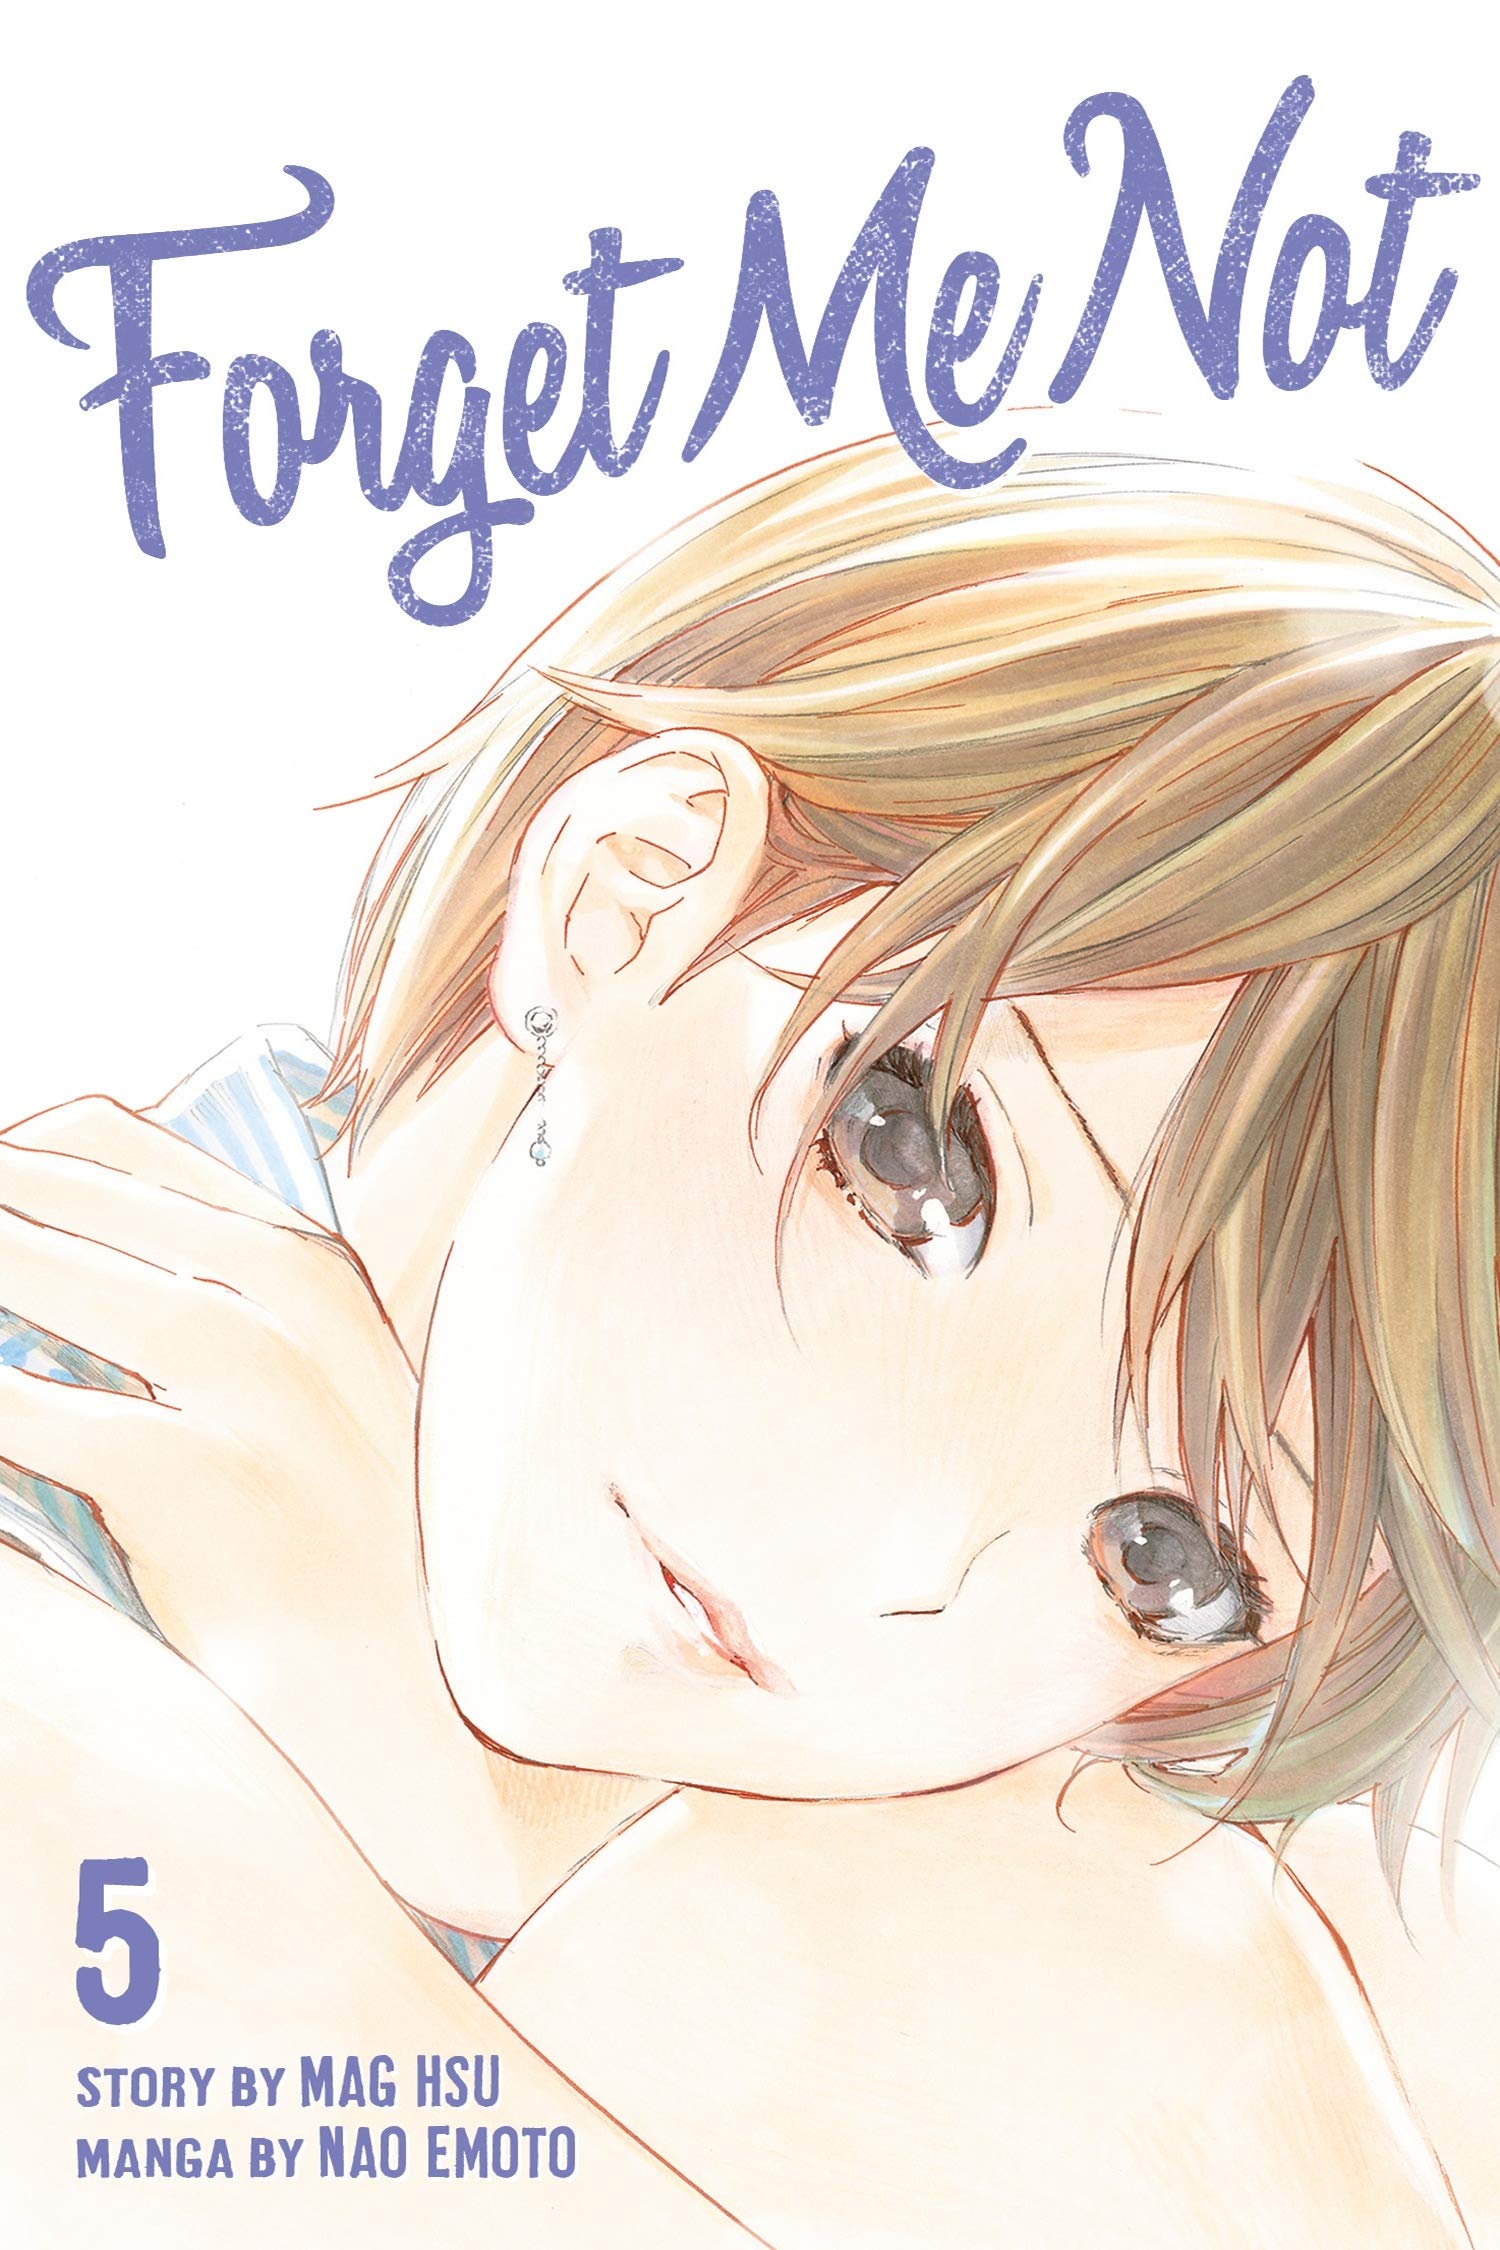 Forget Me Not, vol. 5